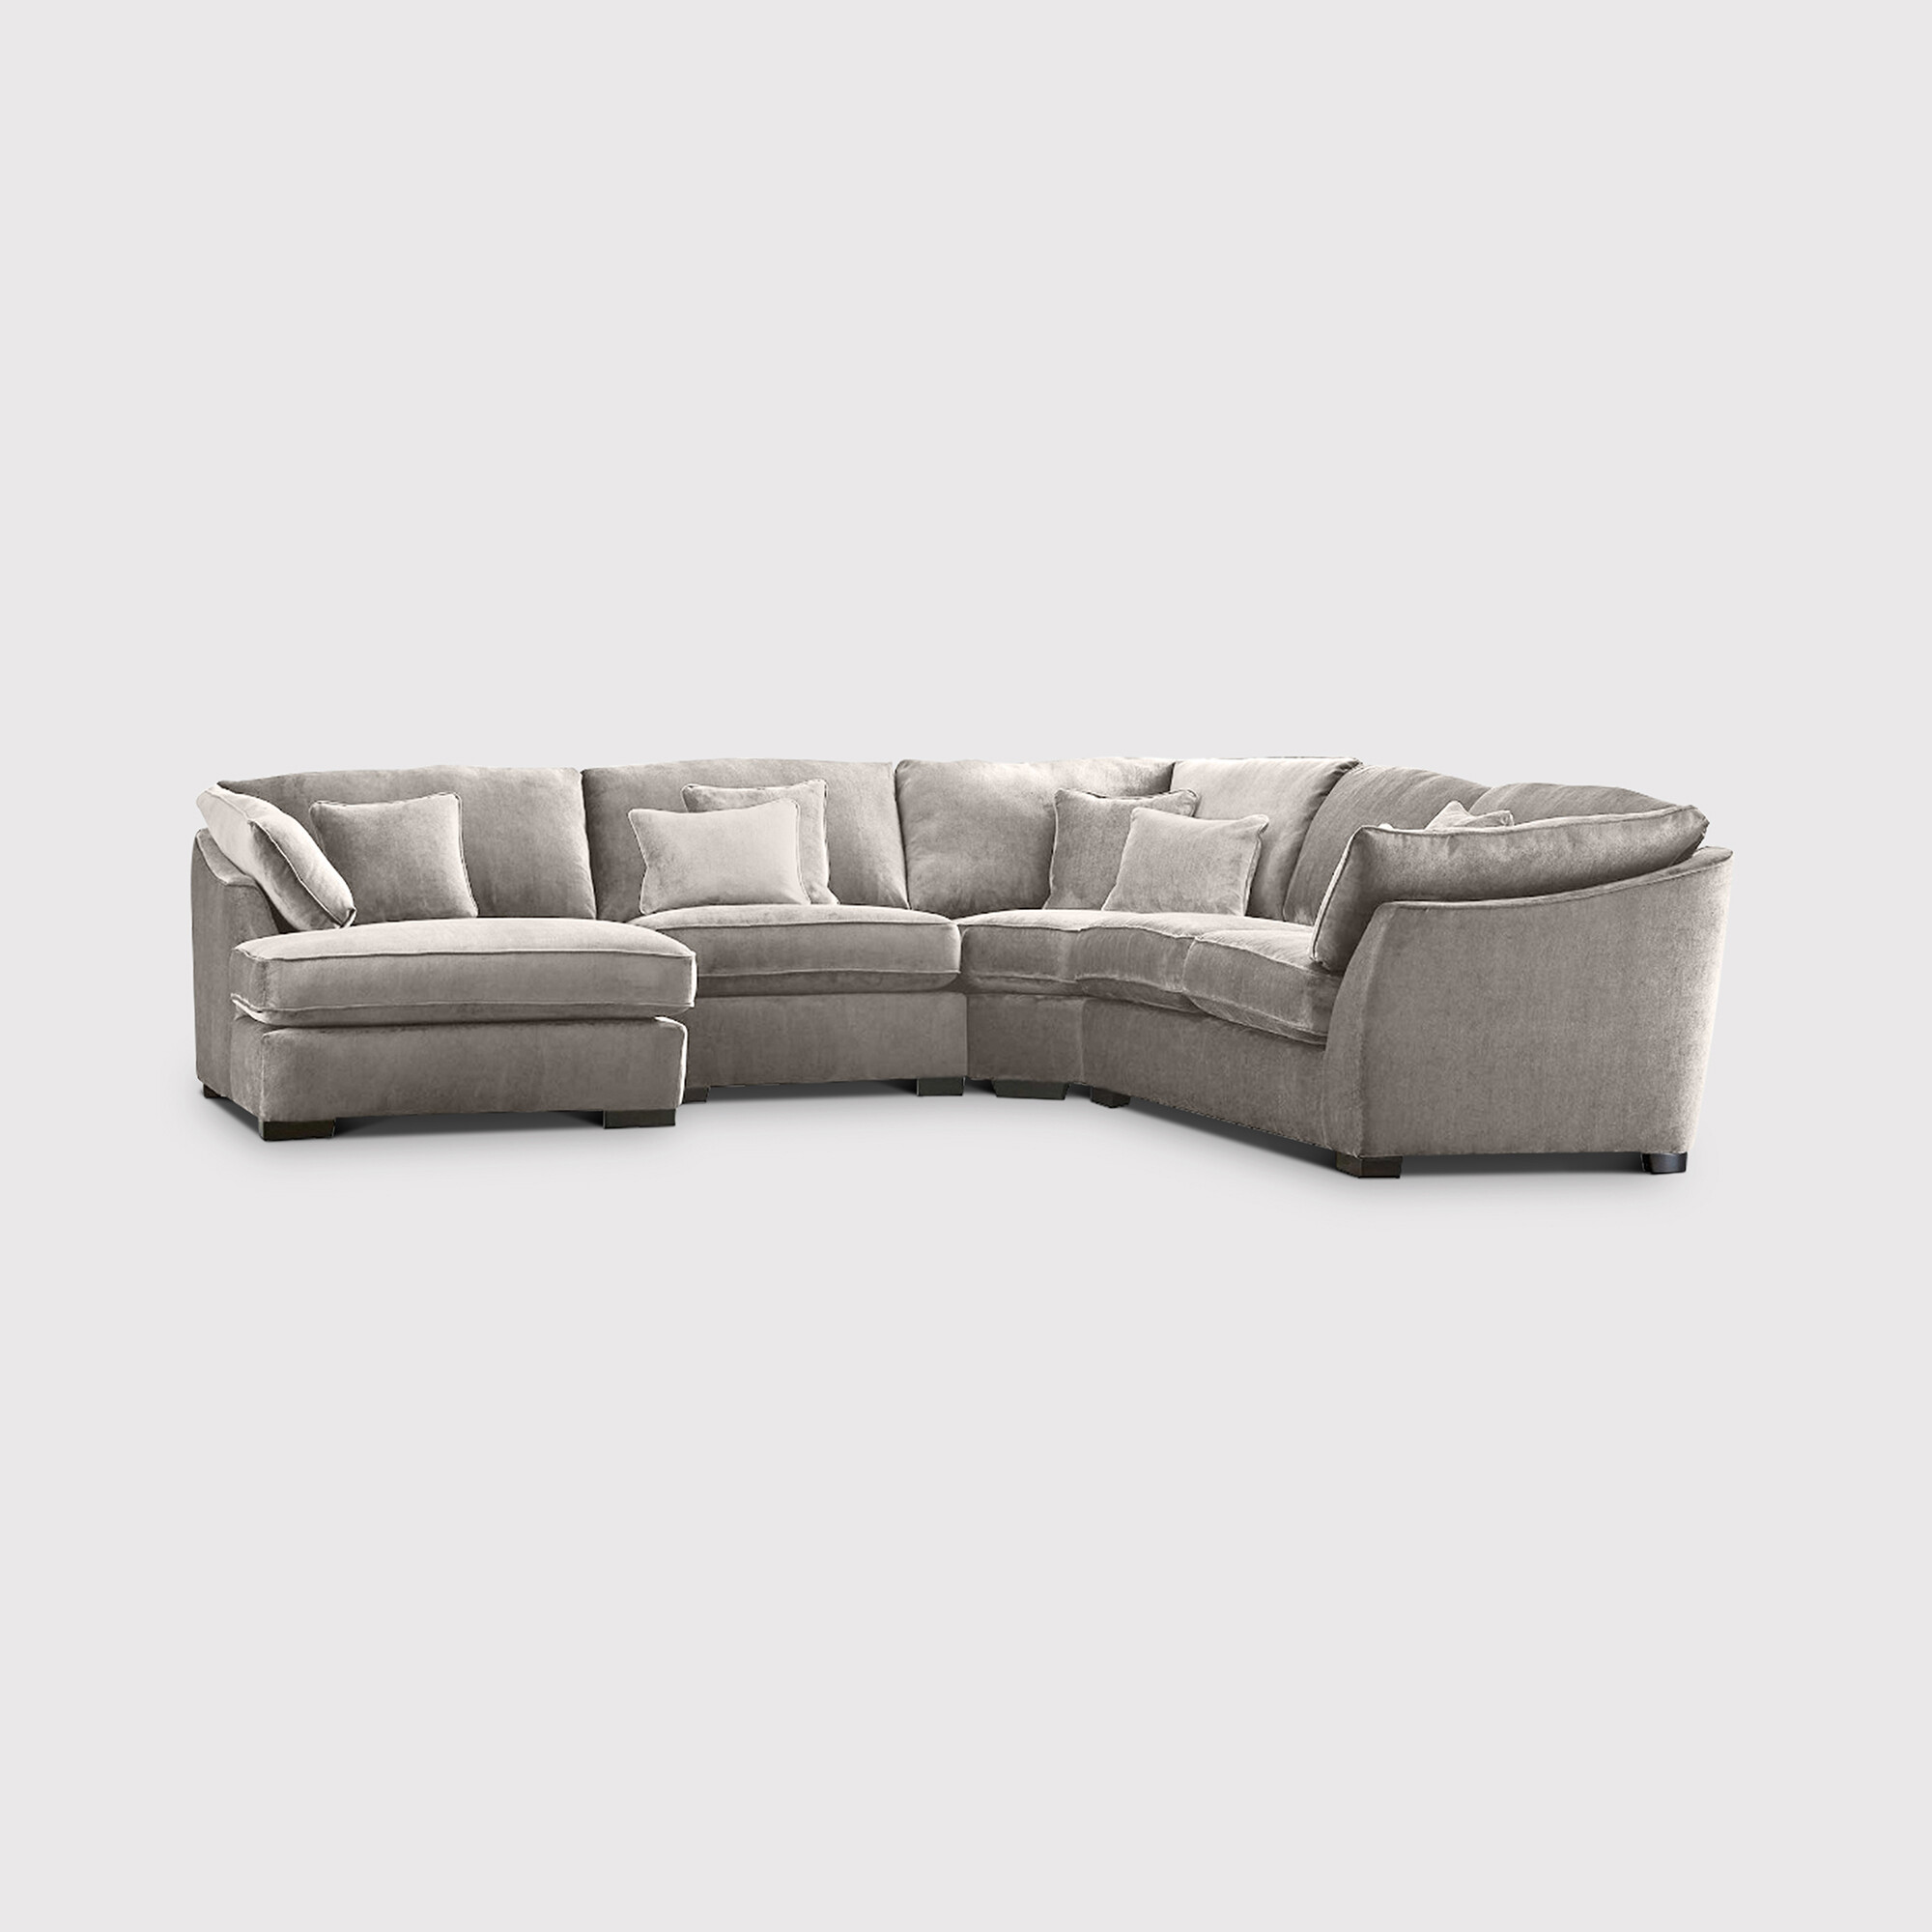 Borelly Corner Group Right With Chaise, Grey Fabric | Barker & Stonehouse